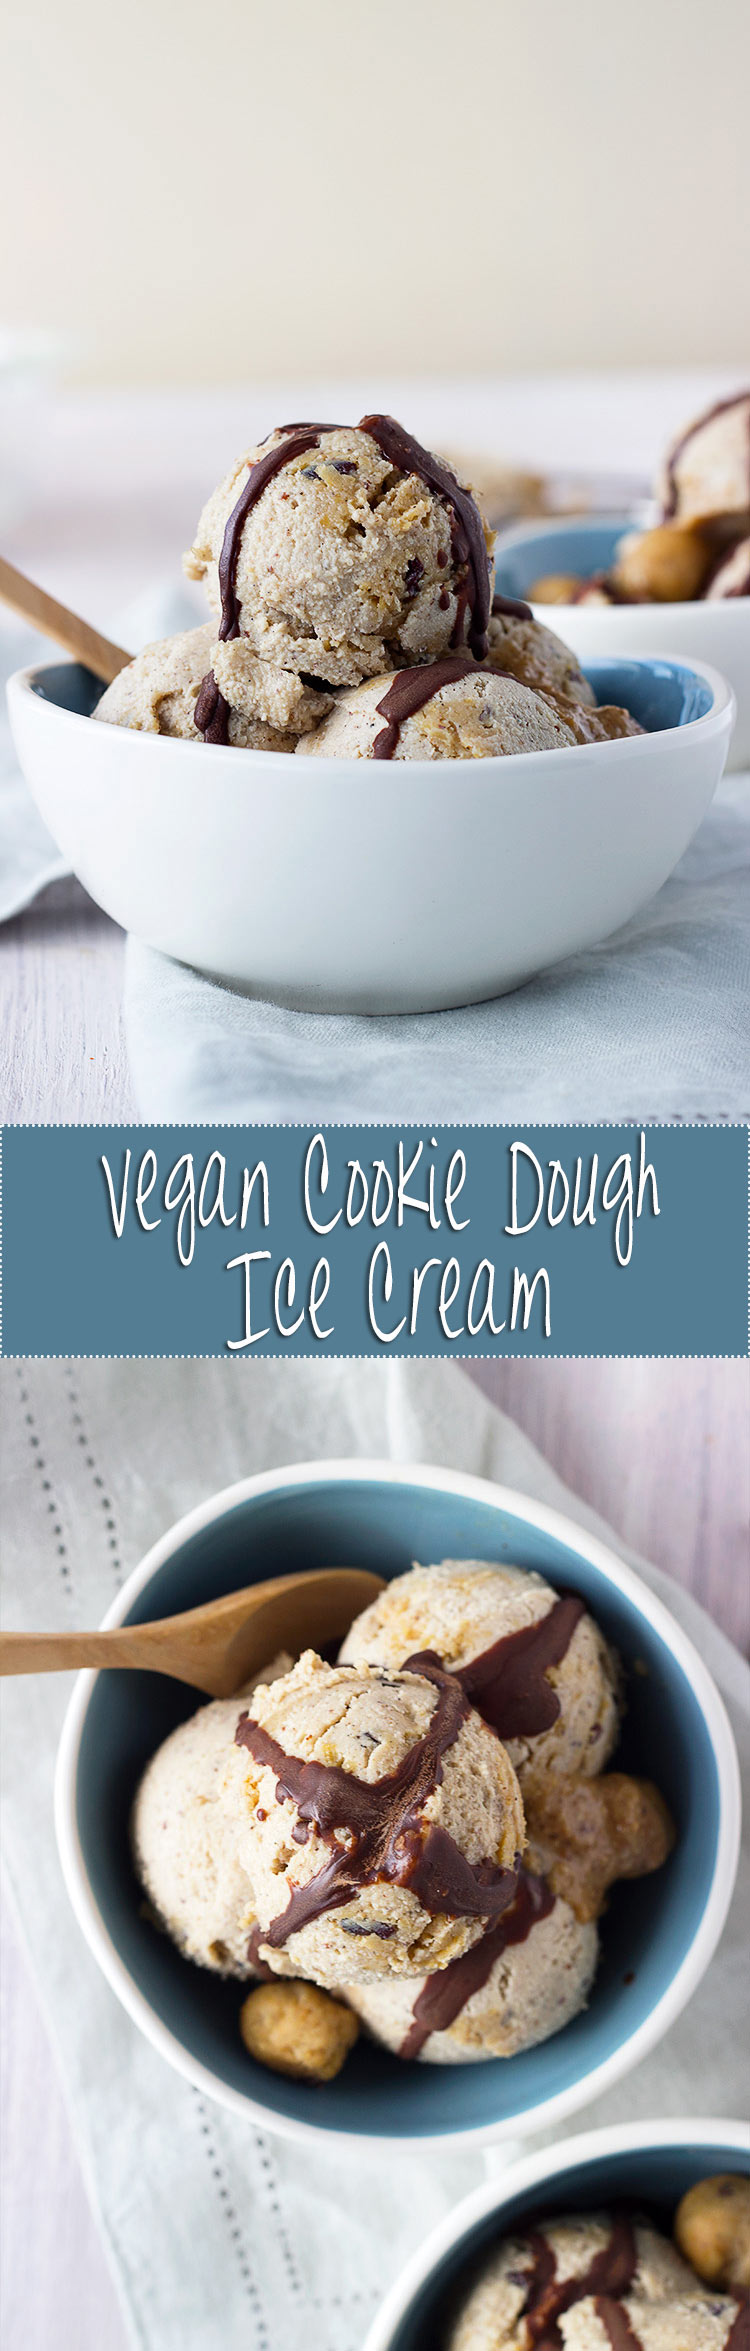 Guilt-Free Cookie Dough Ice Cream (Vegan & Gluten Free!) | What could be better than guilt-free ice cream? Absolutely nothing! From www.sprinkleofgreen.com